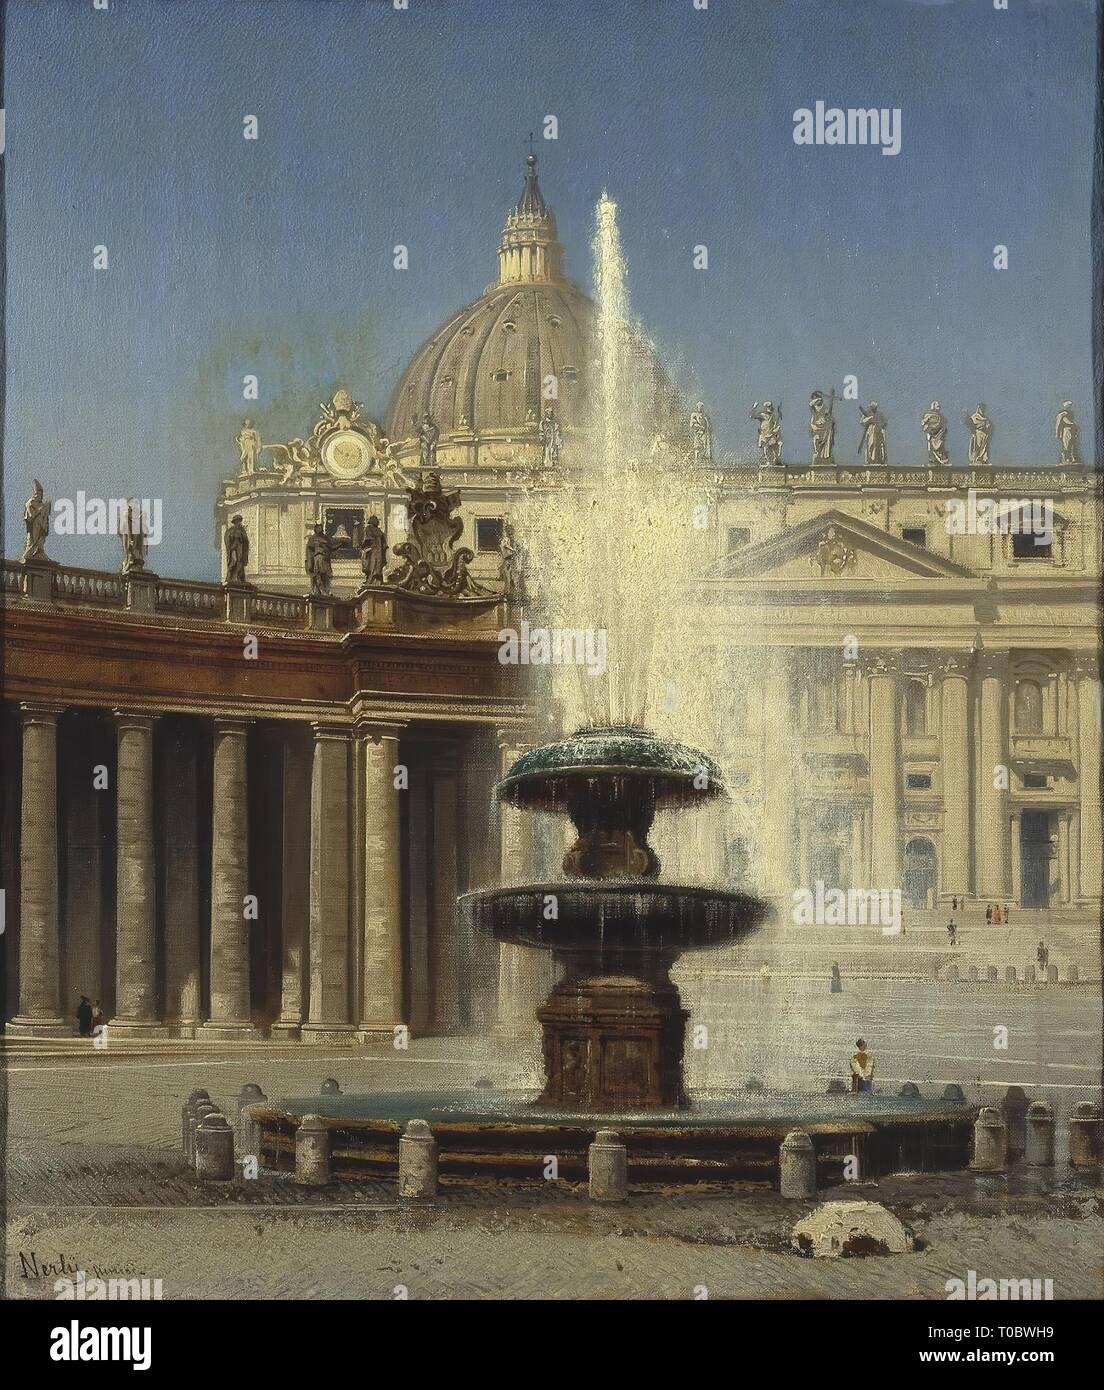 'Fountain in front of St Peter's in Rome'. Germany, Second half of 19th century. Dimensions: 33,3x27,7 cm. Museum: State Hermitage, St. Petersburg. Author: Friedrich Paul Nerly (Nerlich). Stock Photo